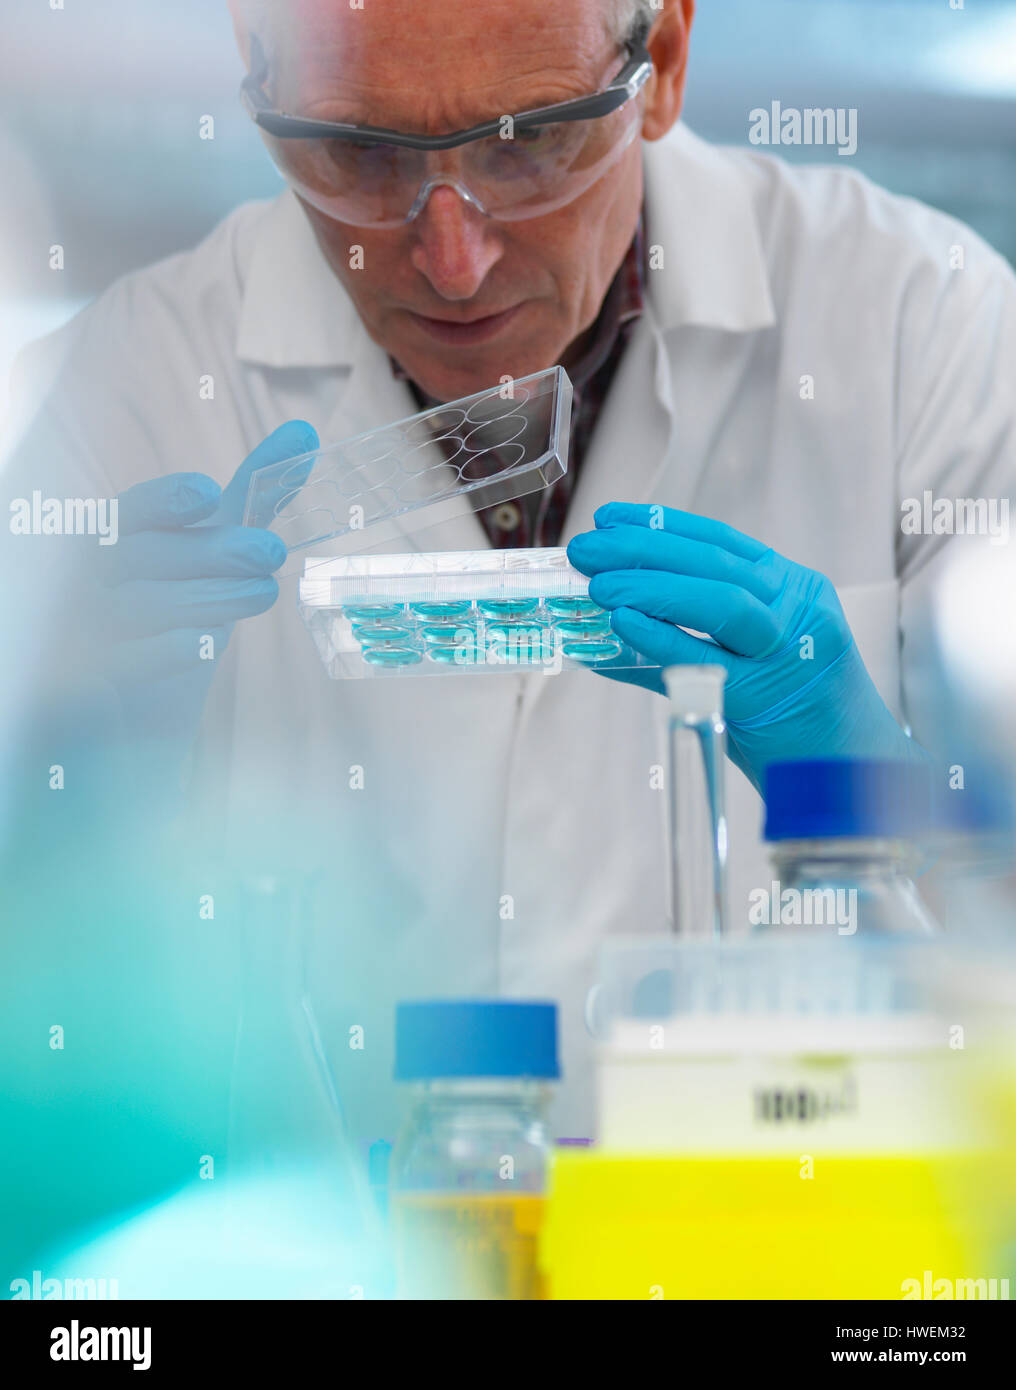 Biotechnology Research, scientist viewing samples in a multi well plate during an experiment in the laboratory Stock Photo